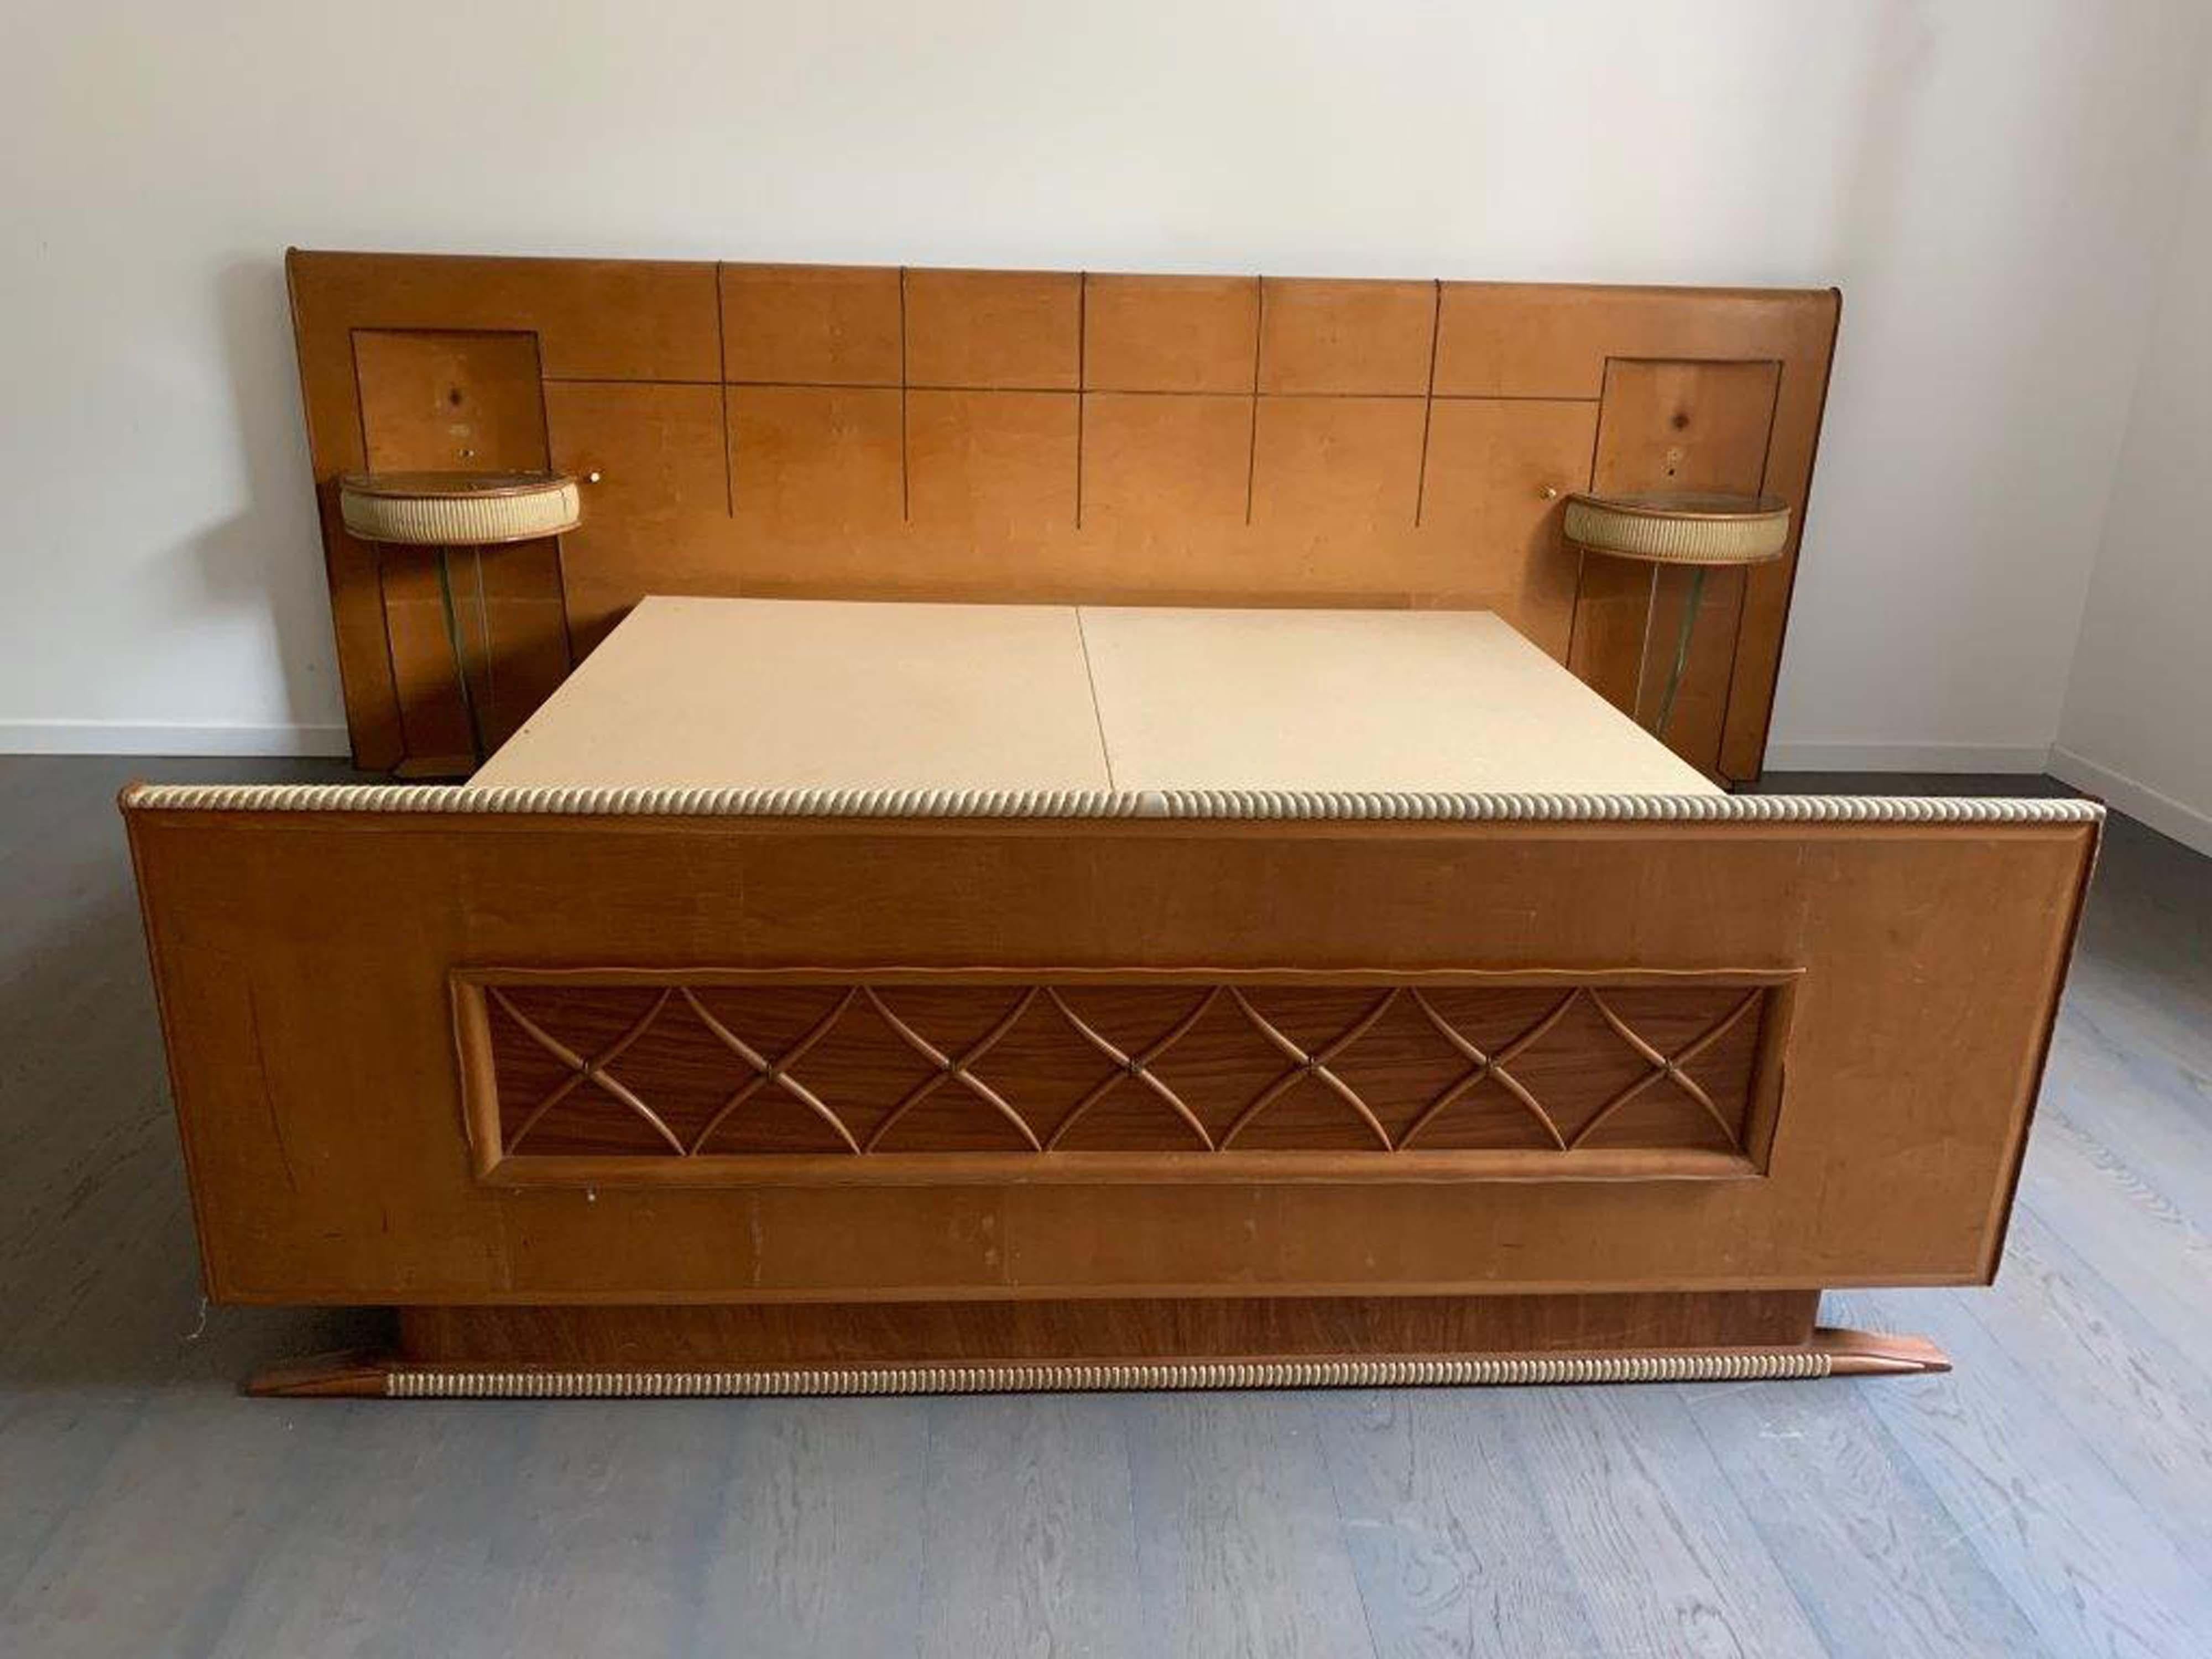 Art Deco maple bed with floating bedside tables, 1930s.
Art Deco bed with floating bedside tables, 1930s. Maple structure with rosewood parts. Headboard decorated with brass lines arranged in a grid pattern. The bedside tables, set within niches,